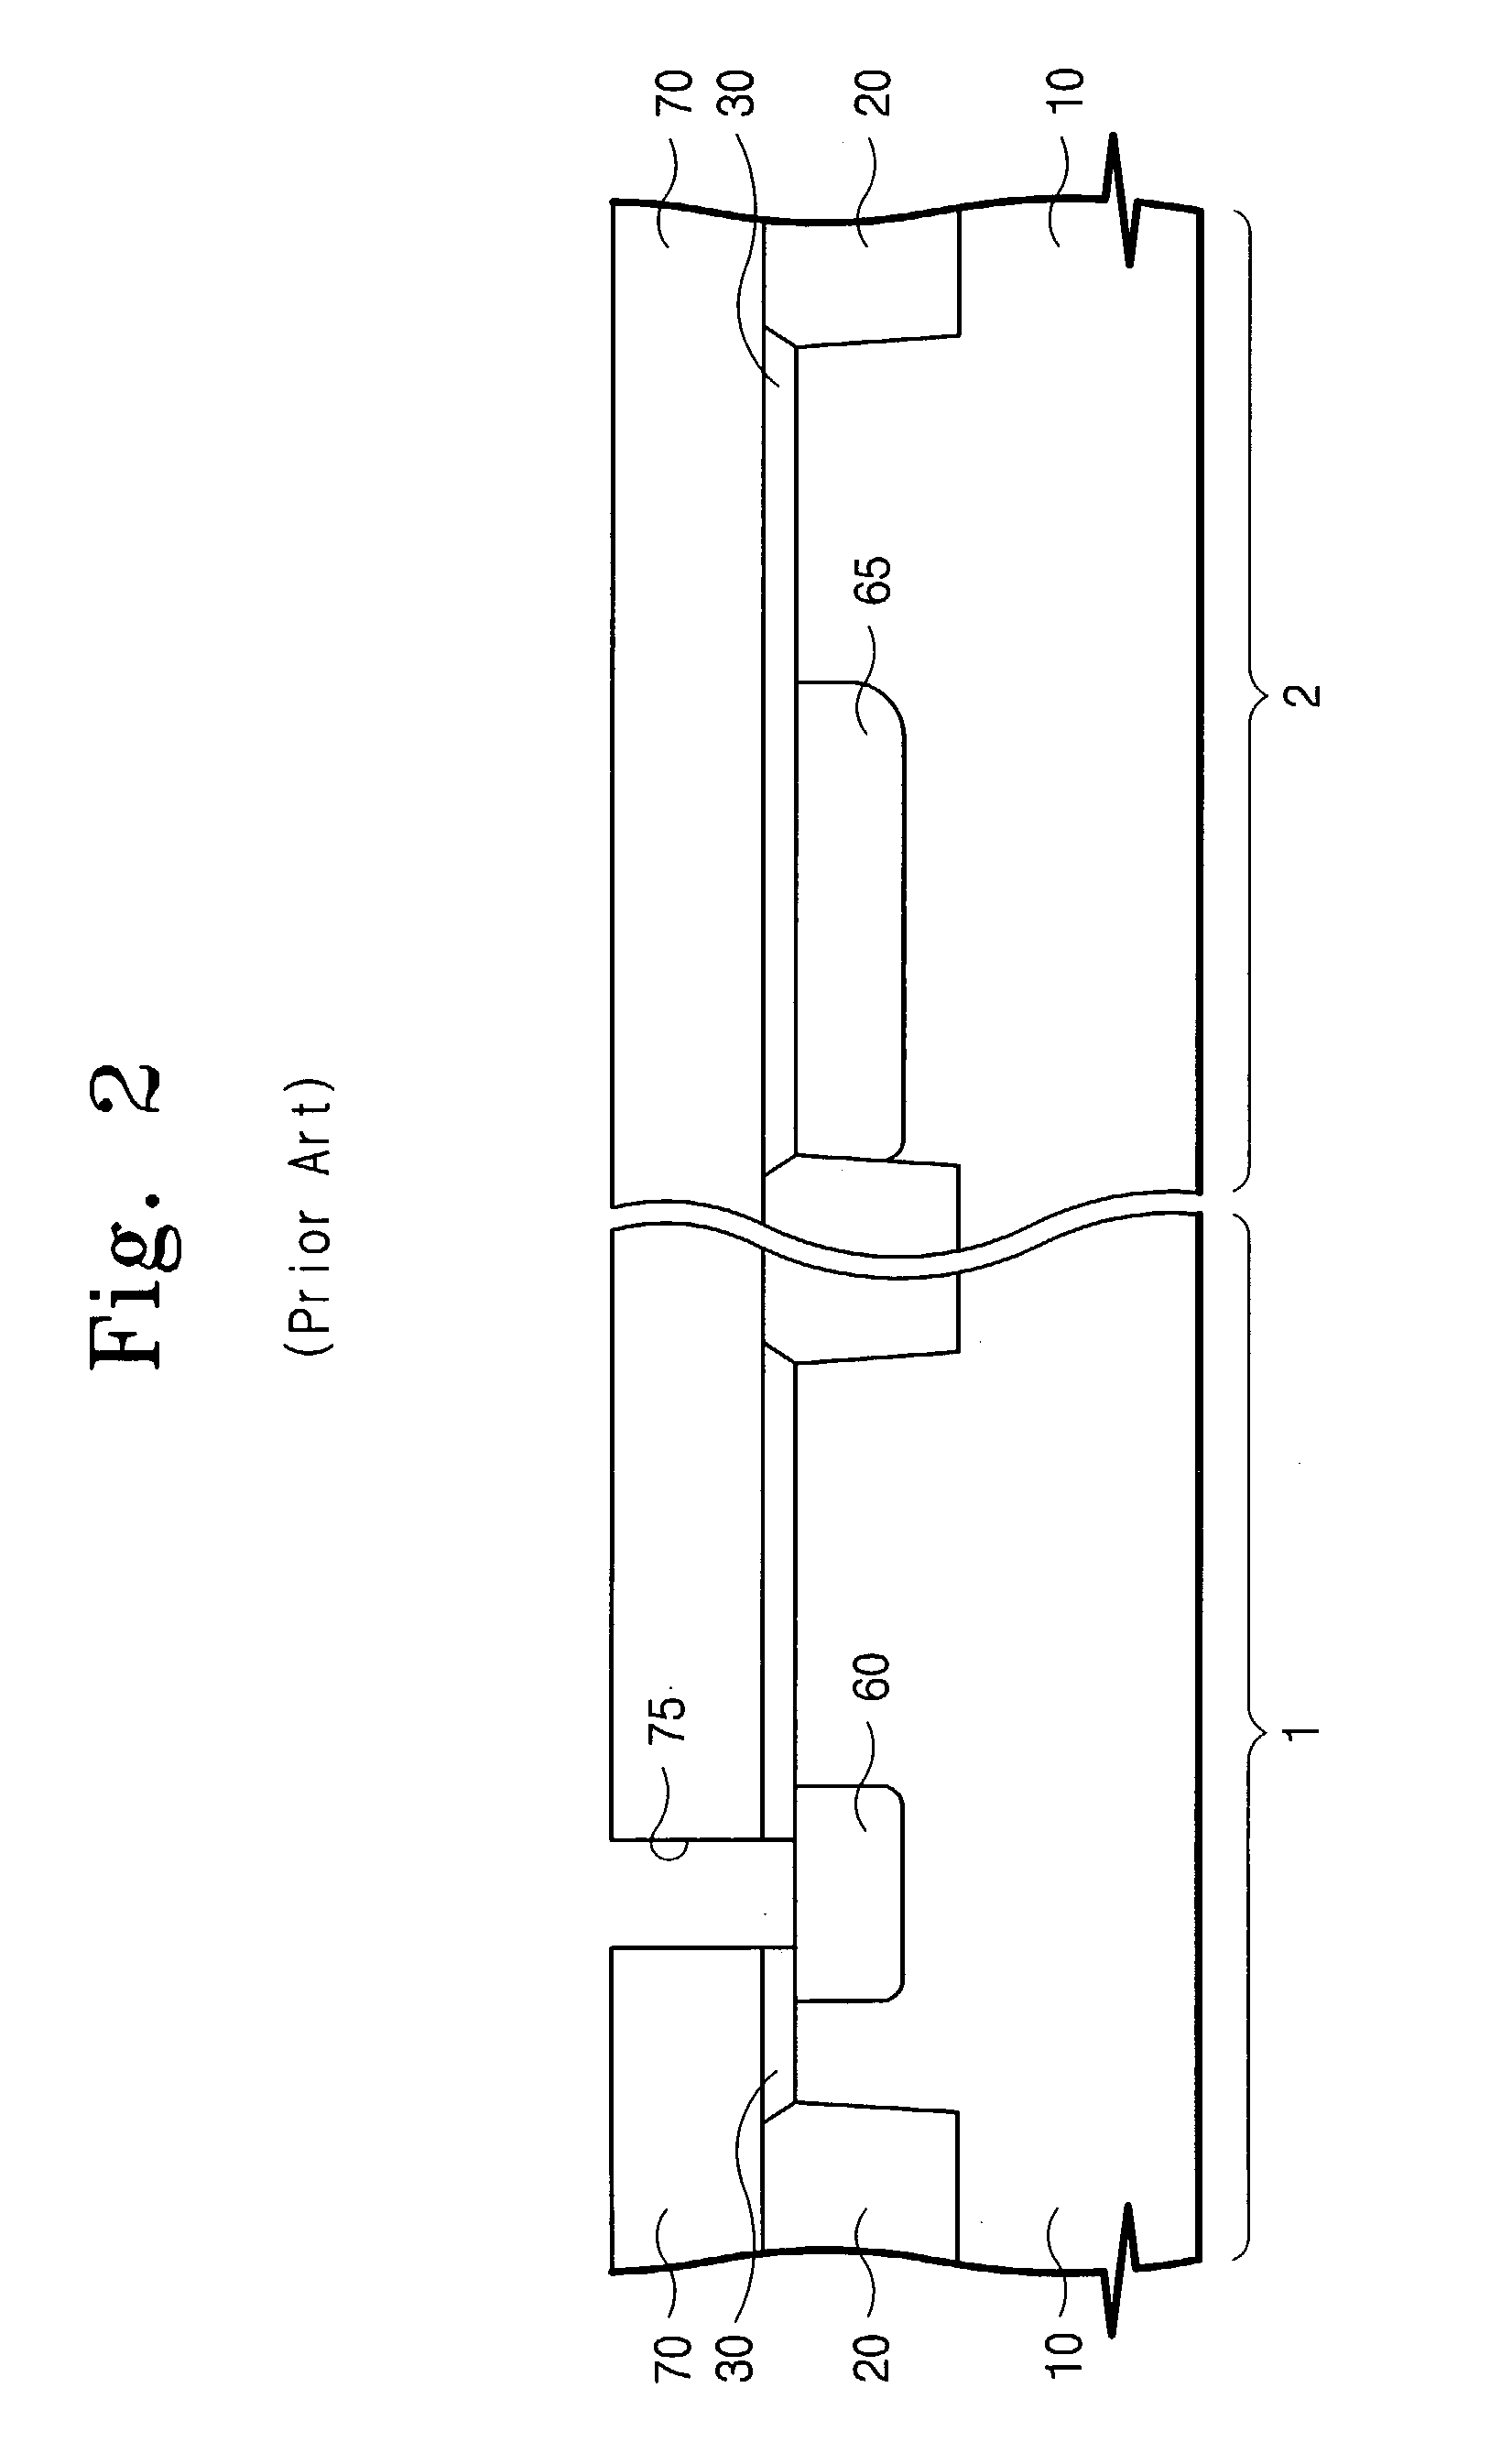 Semiconductor device having electrically erasable programmable read-only memory (EEPROM) and mask-ROM and method of fabricating the same